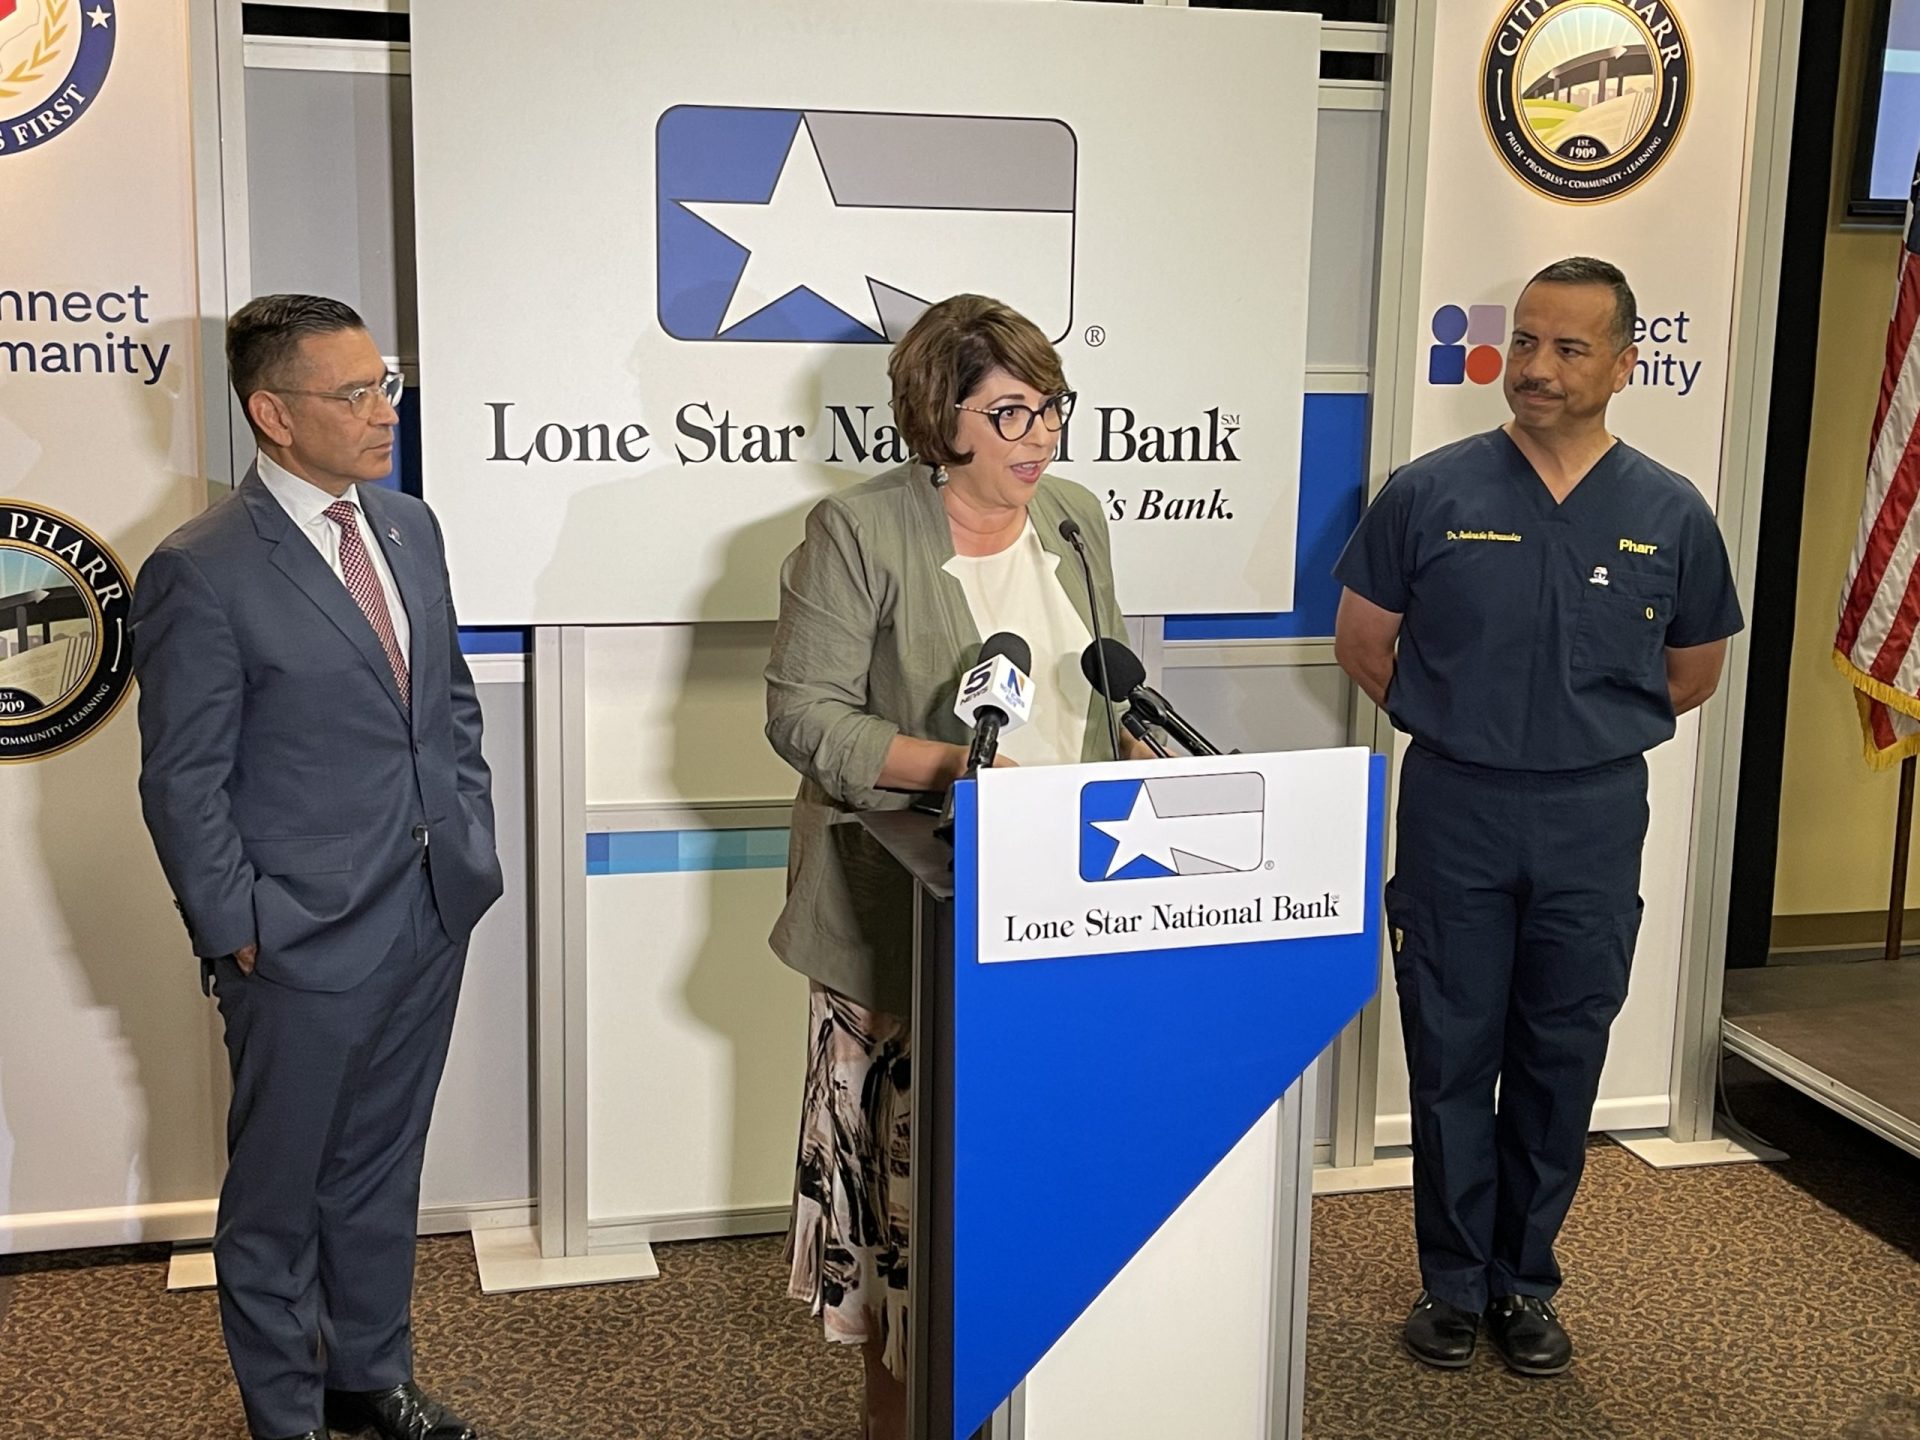 McAllen-based Lone Star National Bank earns high ranking from S&P